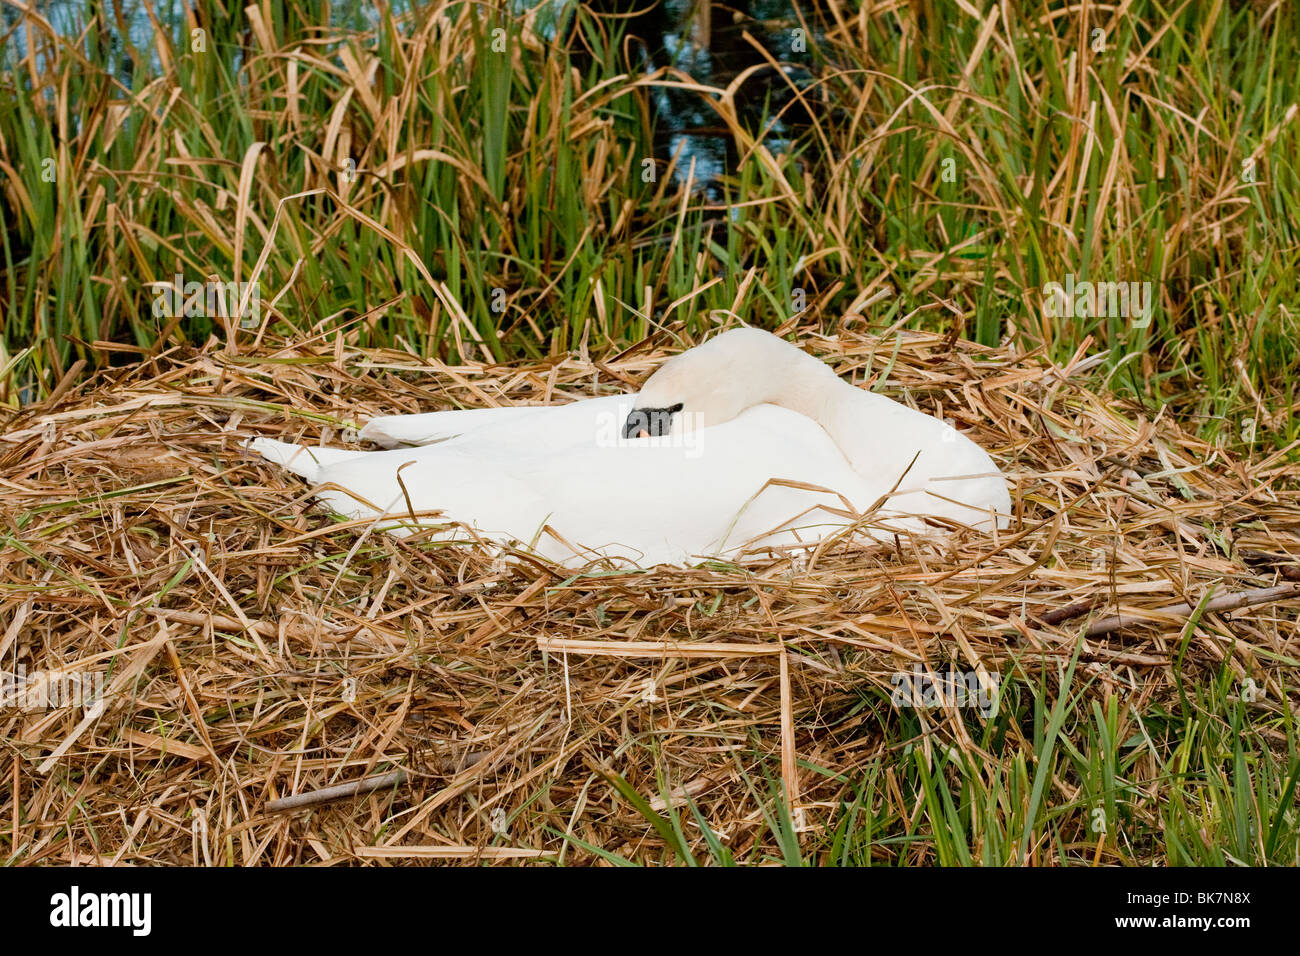 Swan on nest with eggs in an urban environment Stock Photo